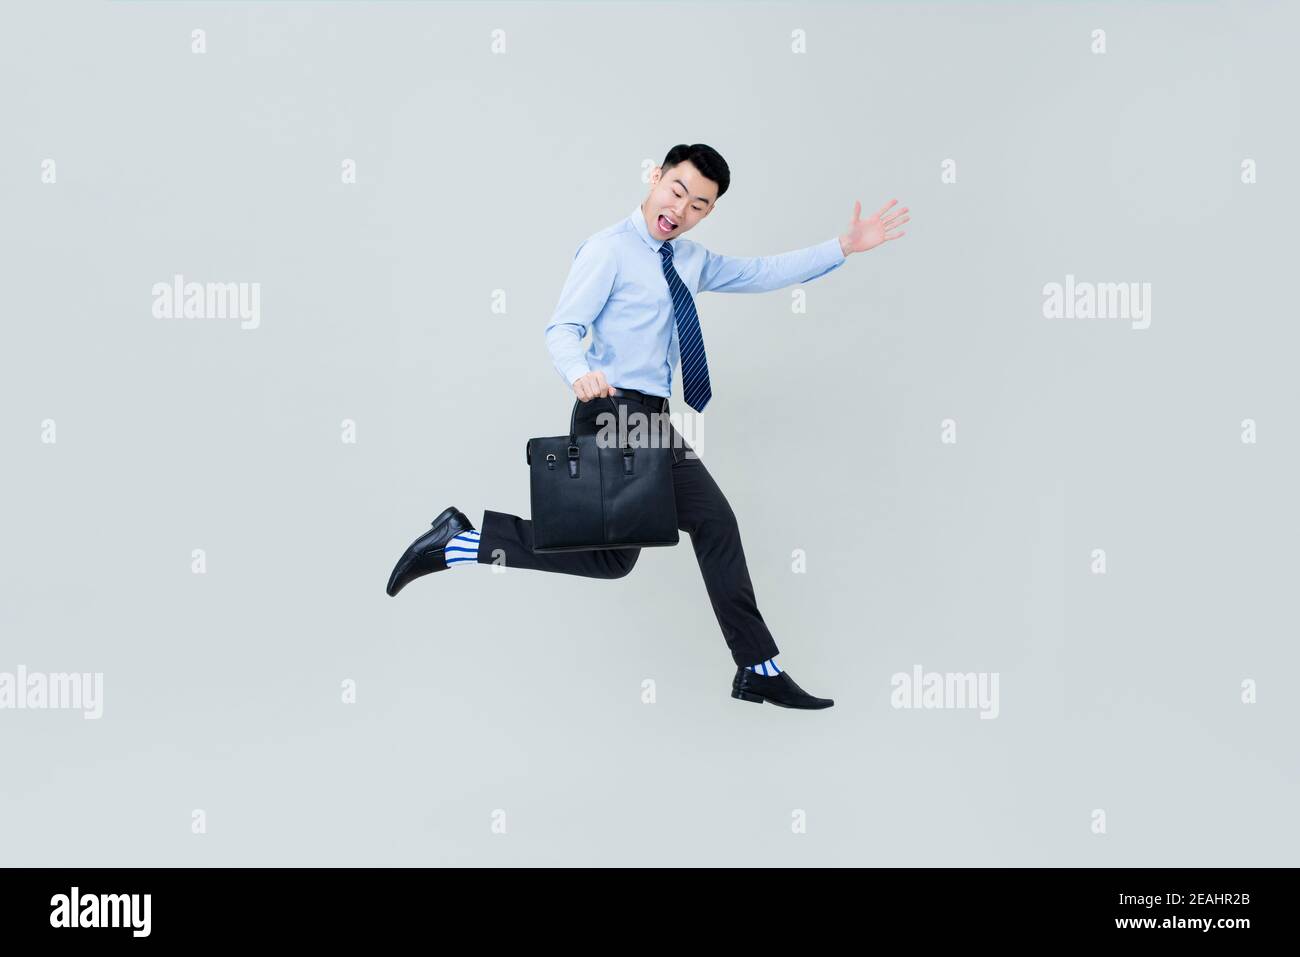 Full body of young happy smiling Asian professional man wearing business clothes and carrying briefcase jumping in midair isolated on light gray backg Stock Photo